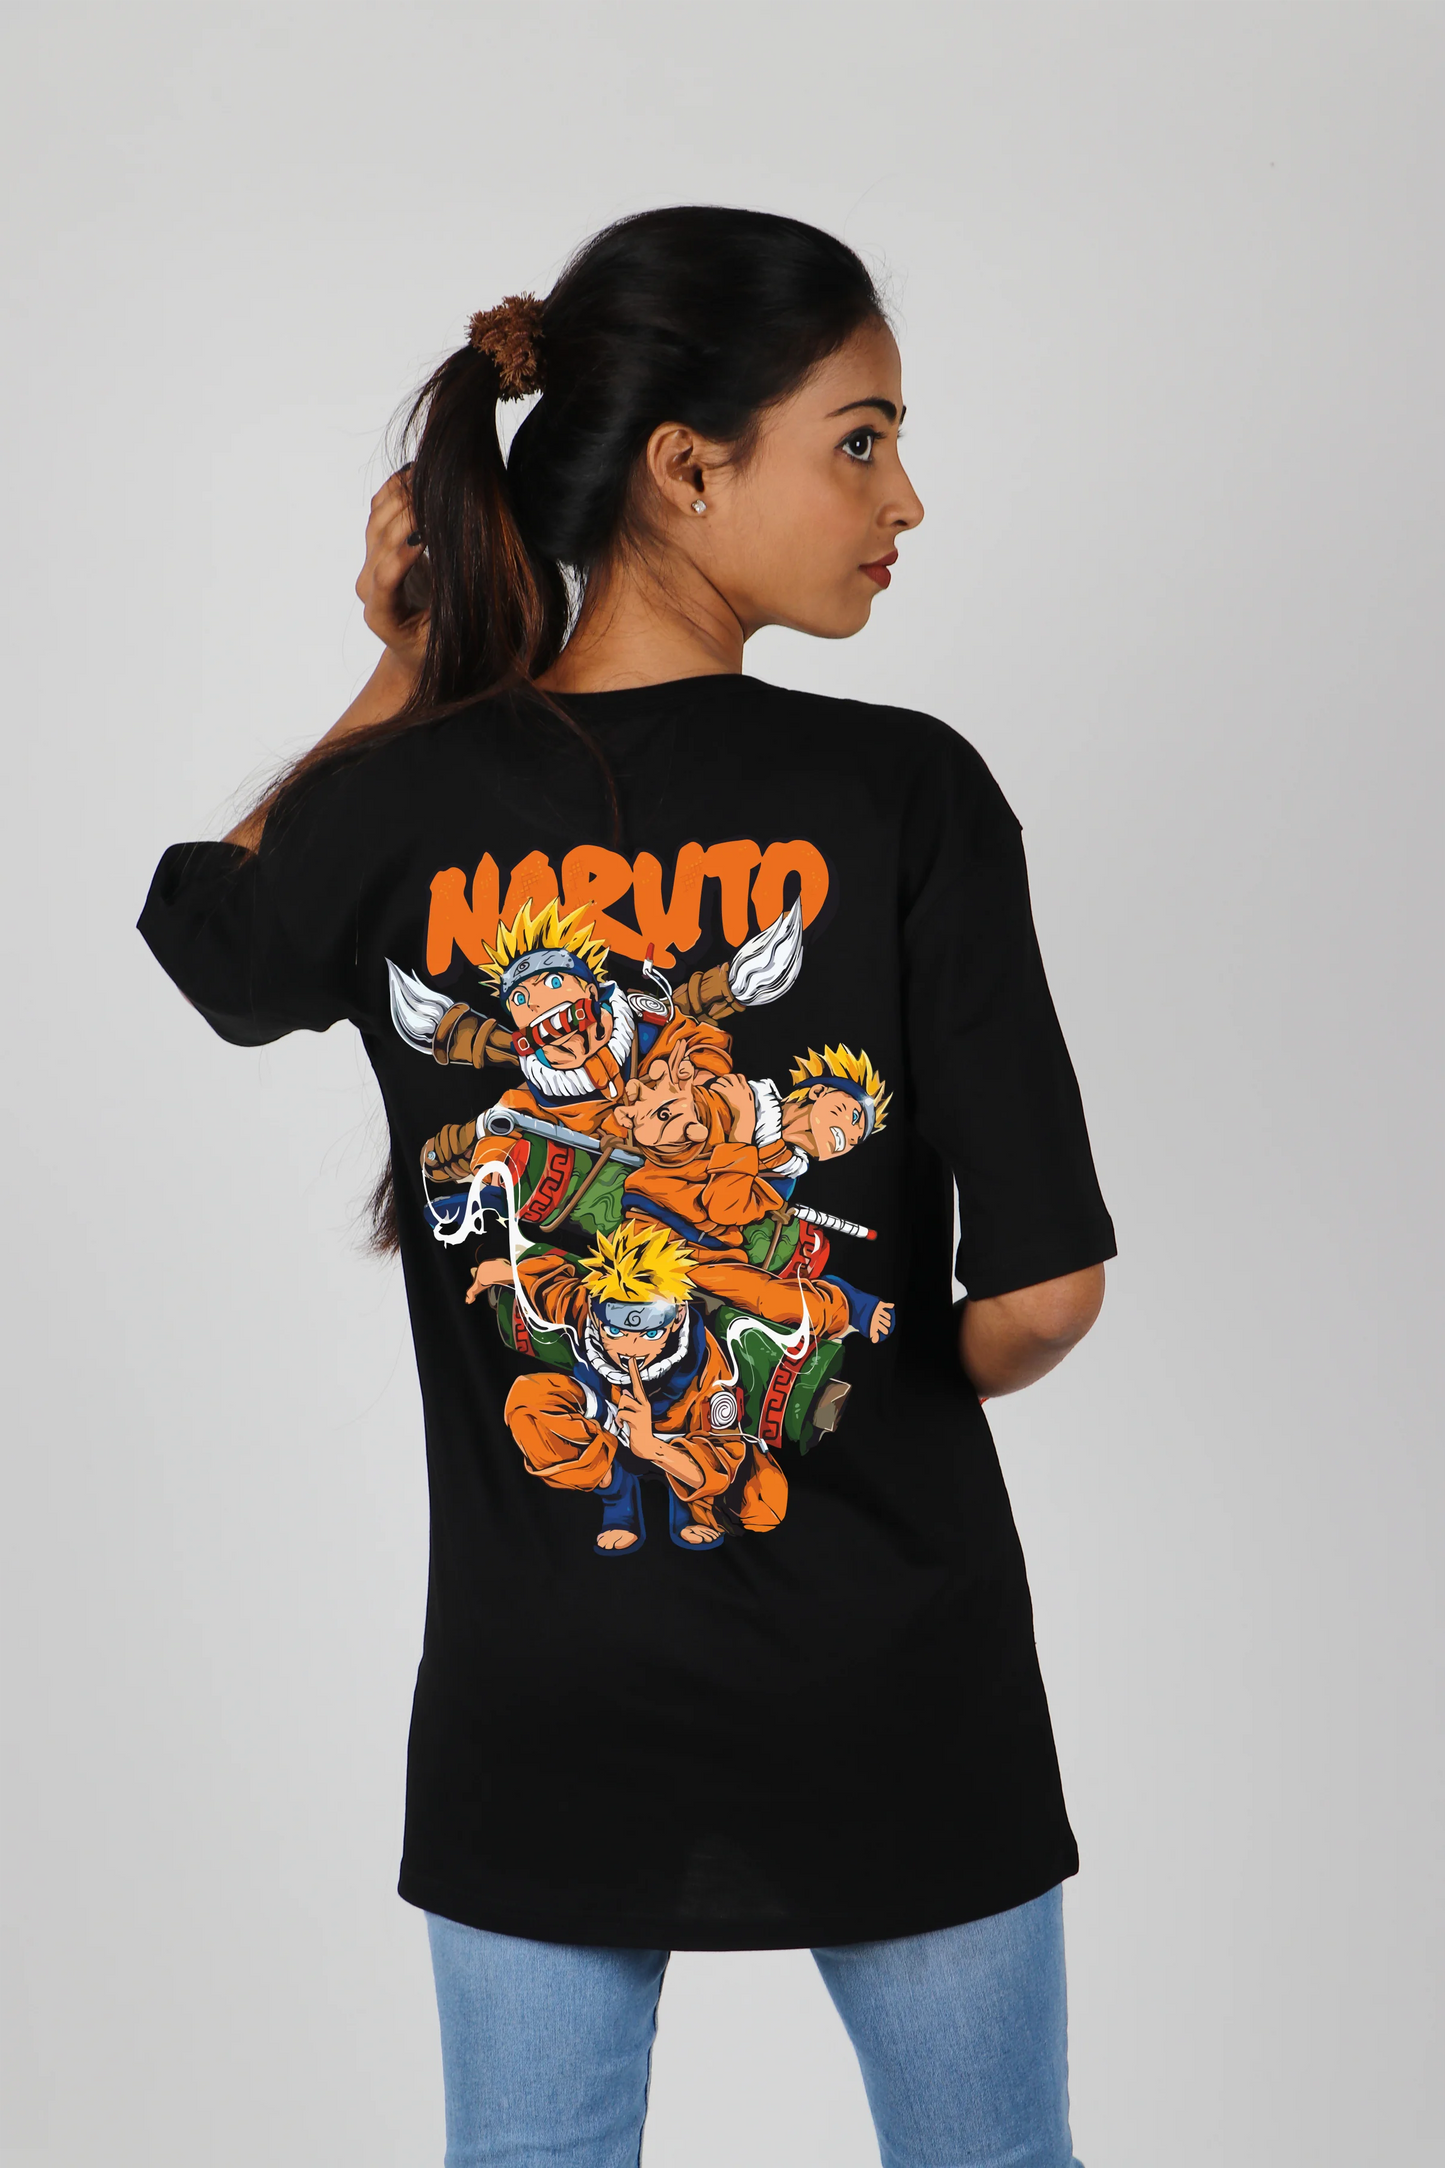 Wear the charm of the Hidden Village proudly with this stylish Naruto T-shirt for women